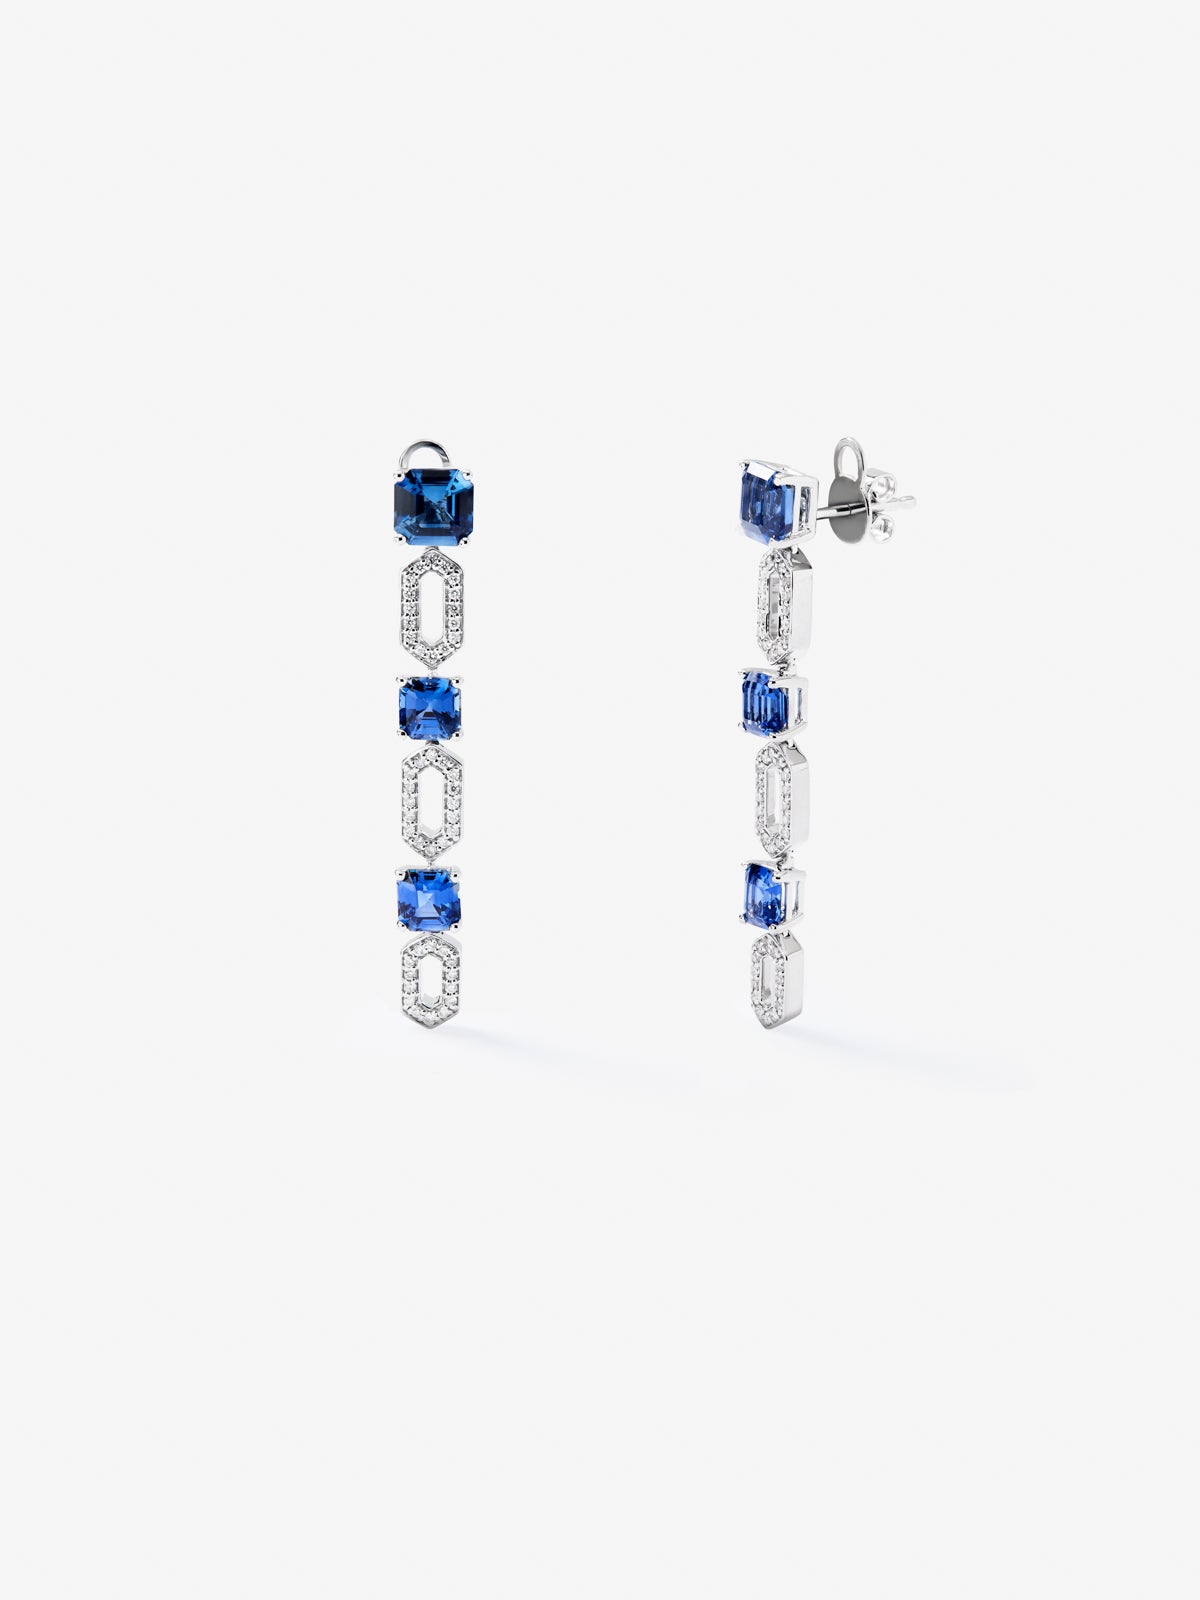 18K white gold earrings with 6 octagonal-cut blue sapphires with a total of 5.32 cts and 92 brilliant-cut diamonds with a total of 0.32 cts